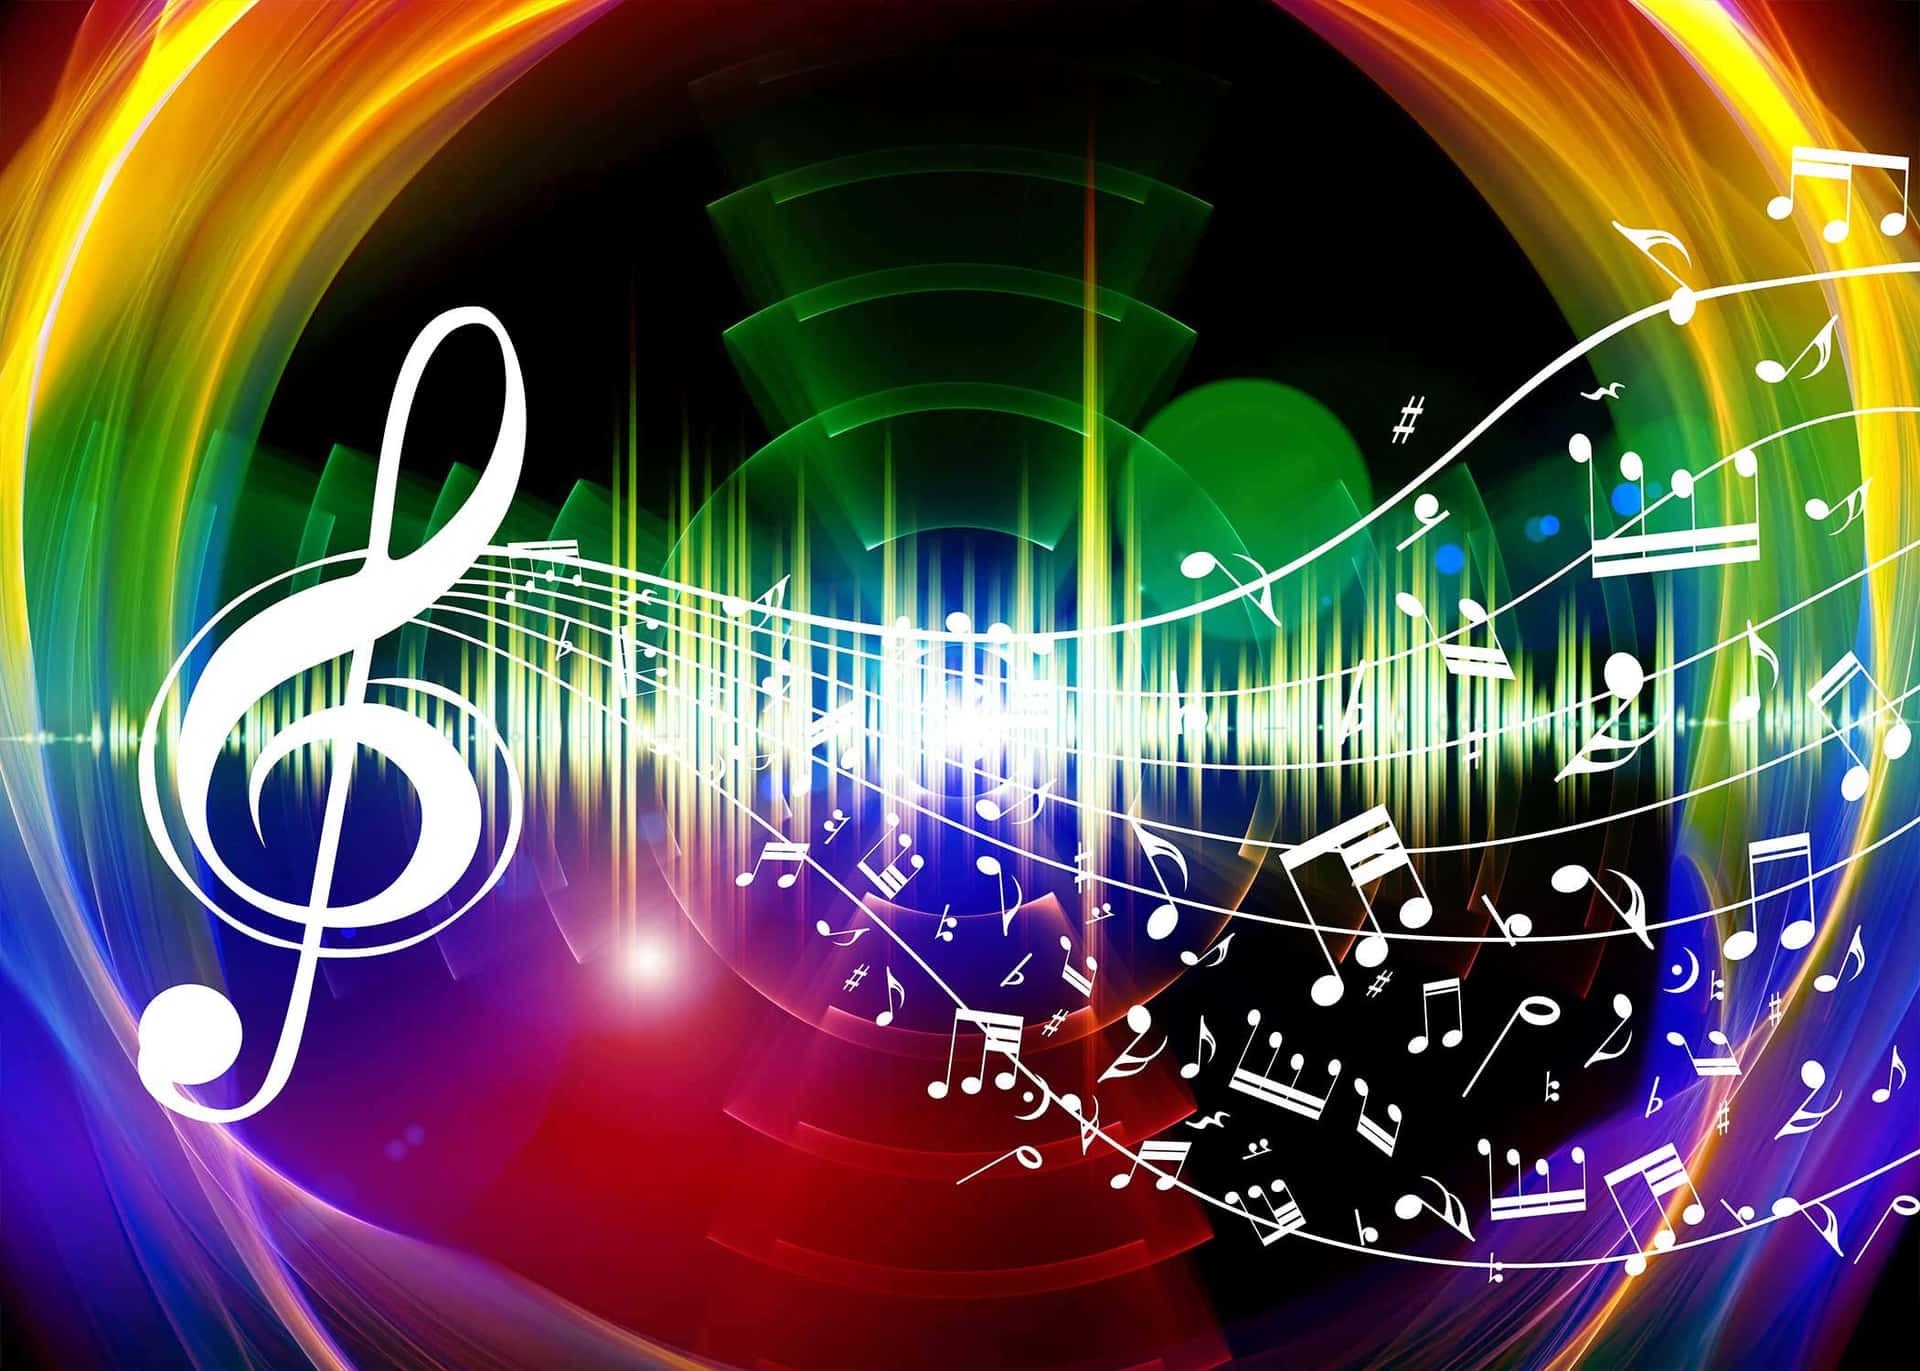 Music PowerPoint Colorful Desktop Background